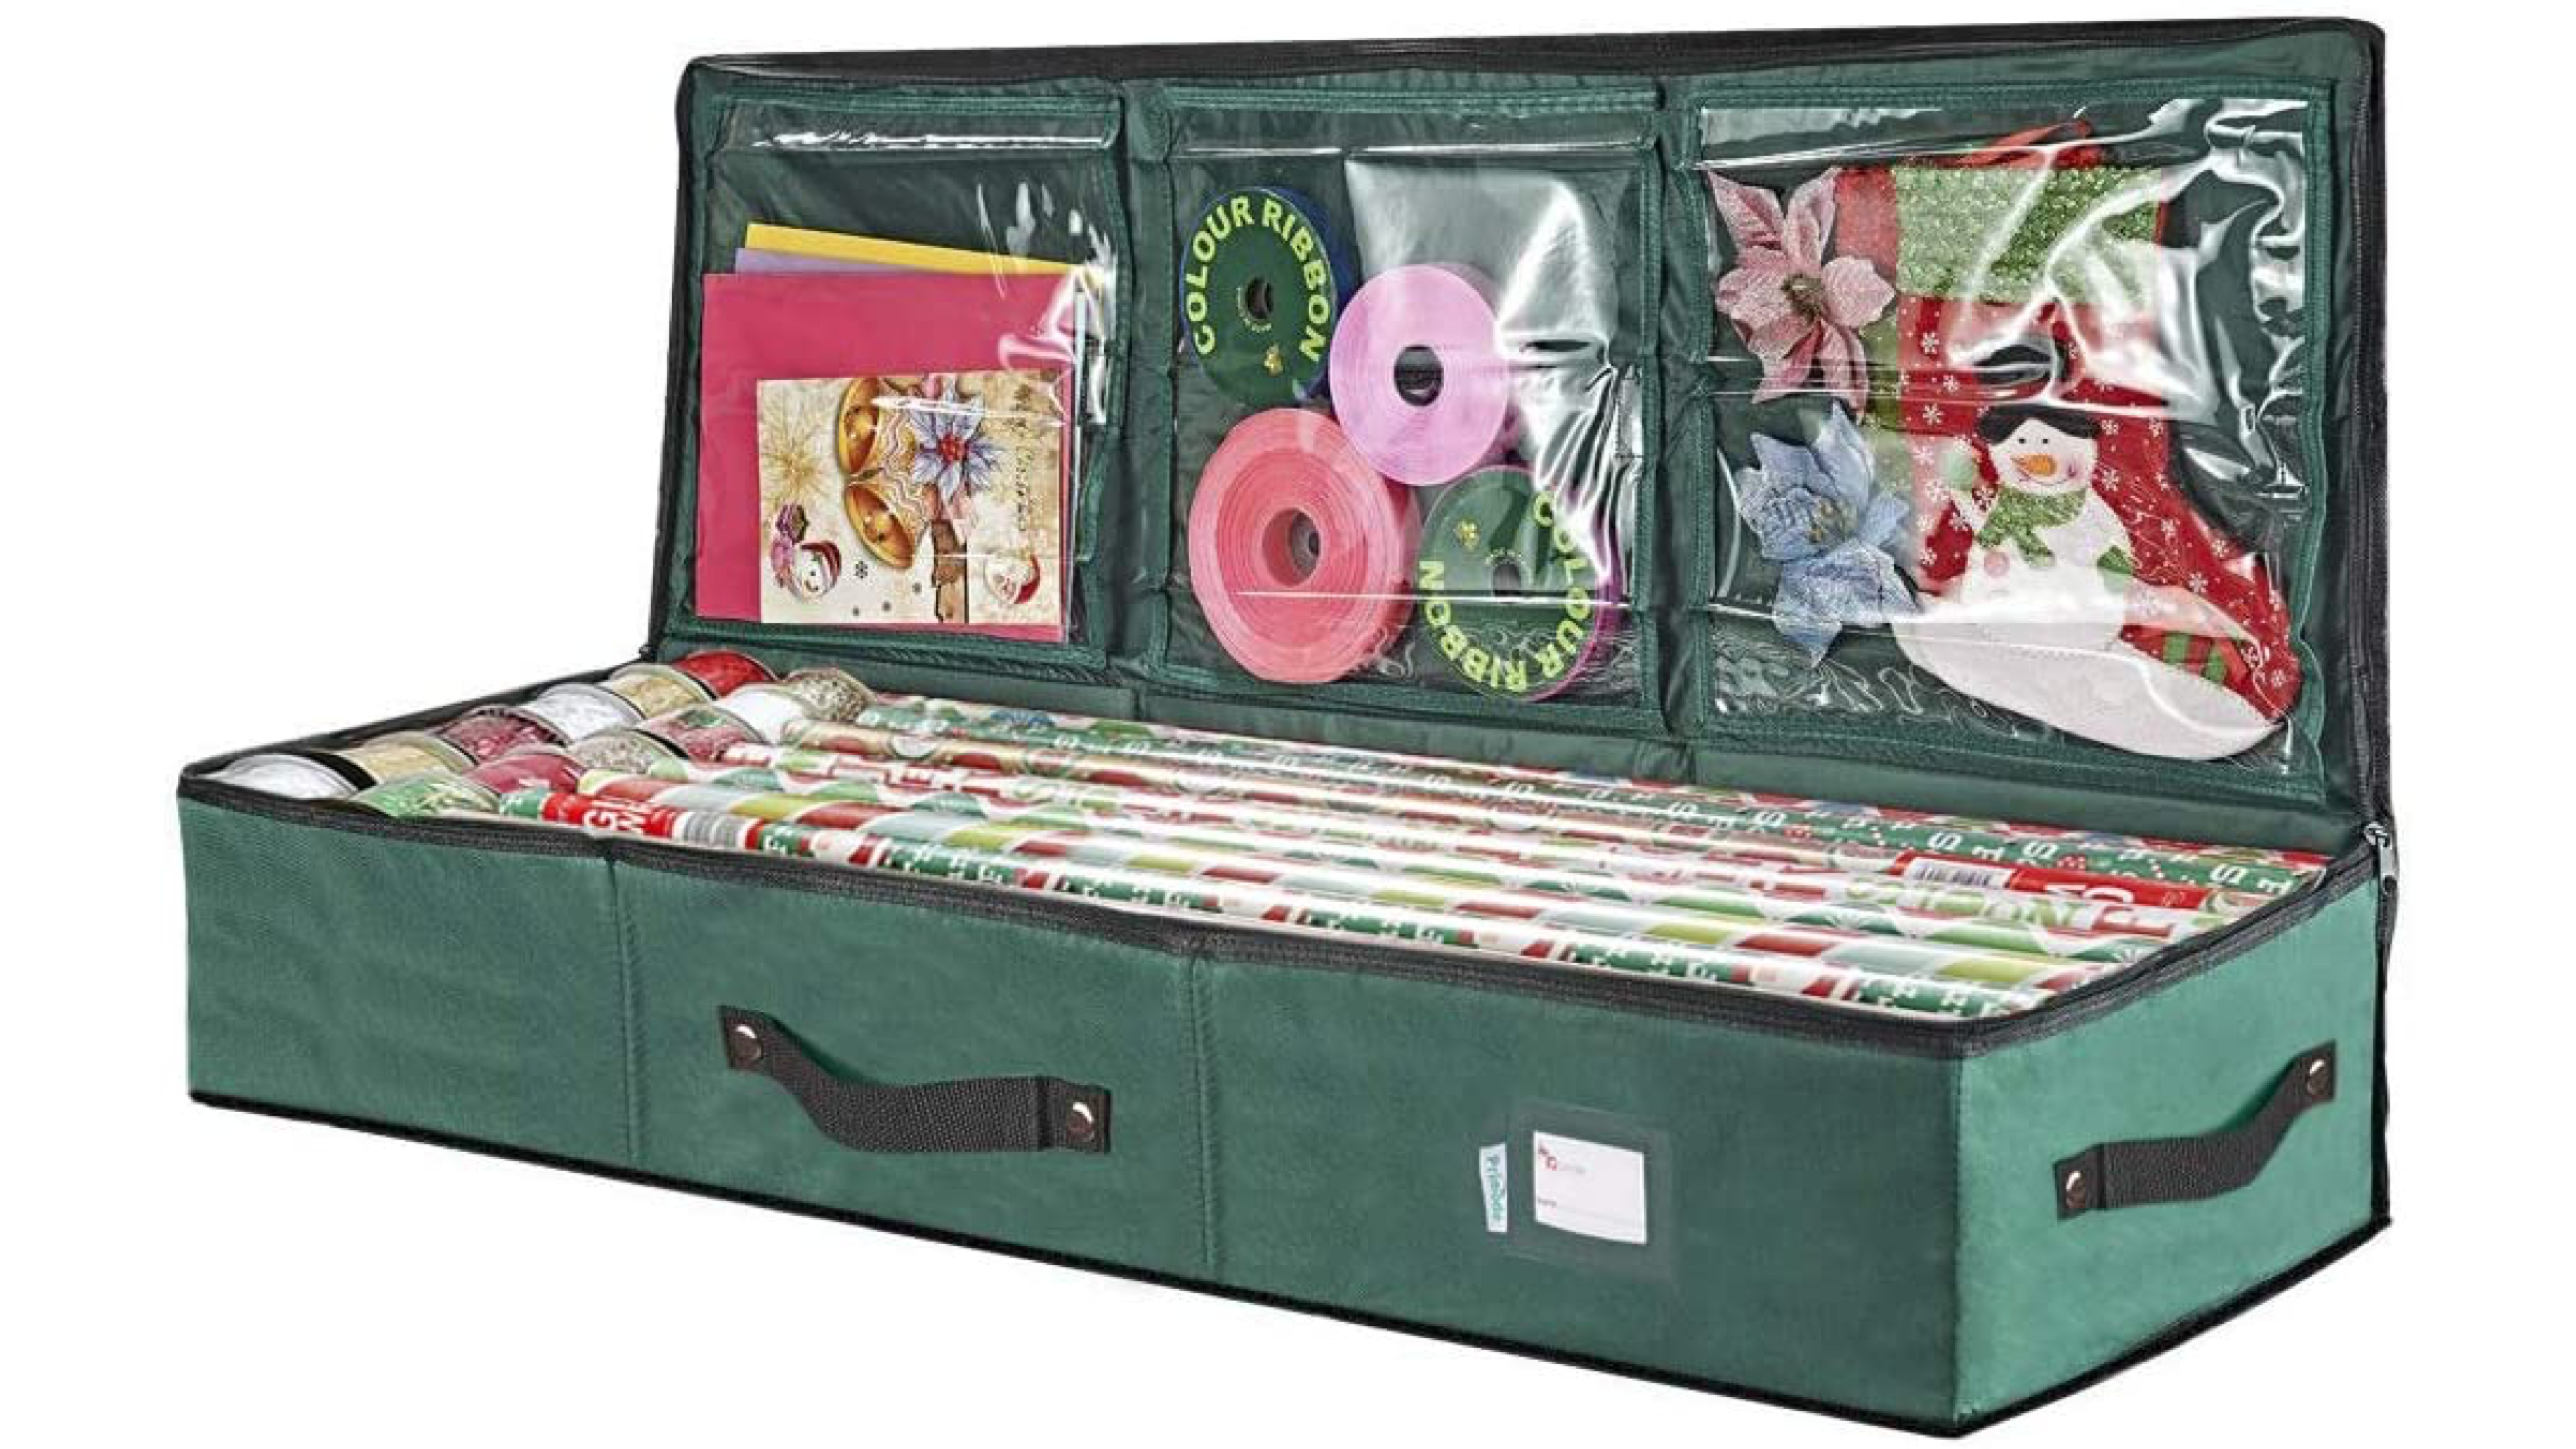 gift wrap storage with pockets for ribbons, tissue paper, tape, and holiday bags